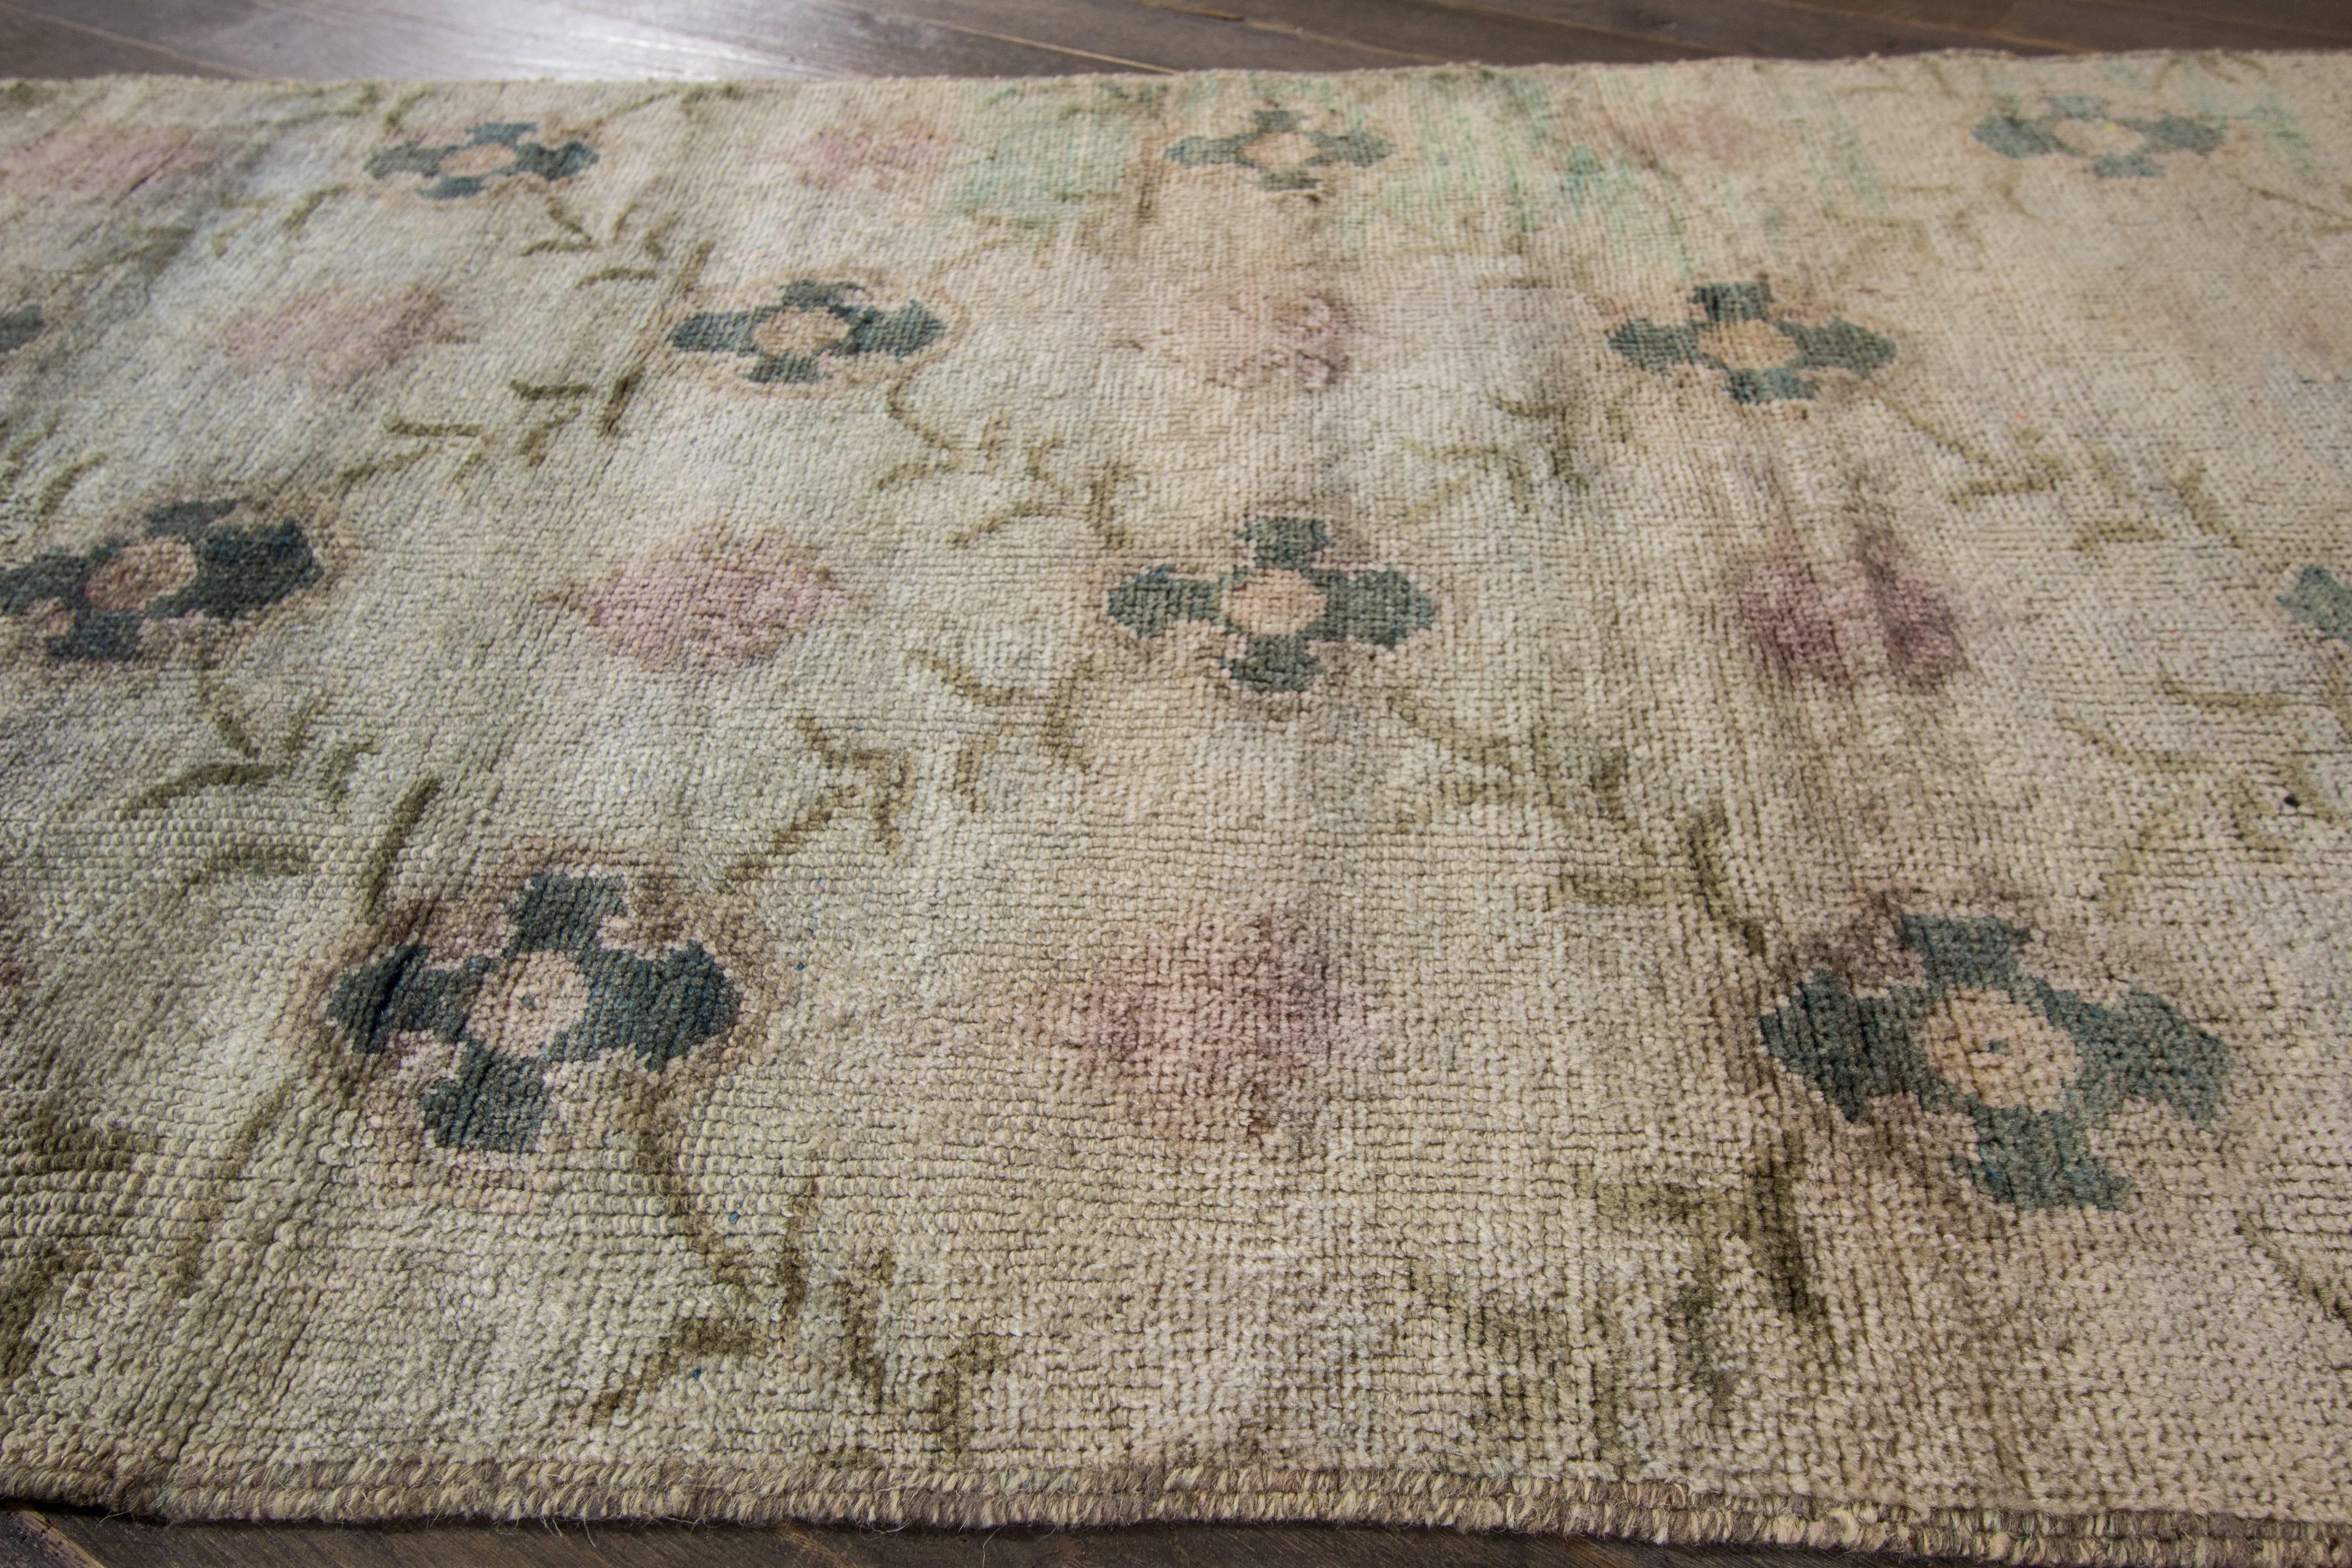 Beautiful Antique Turkish Runner Rug with an all-over floral design with light pink and green accents. This rug measures 2' 8